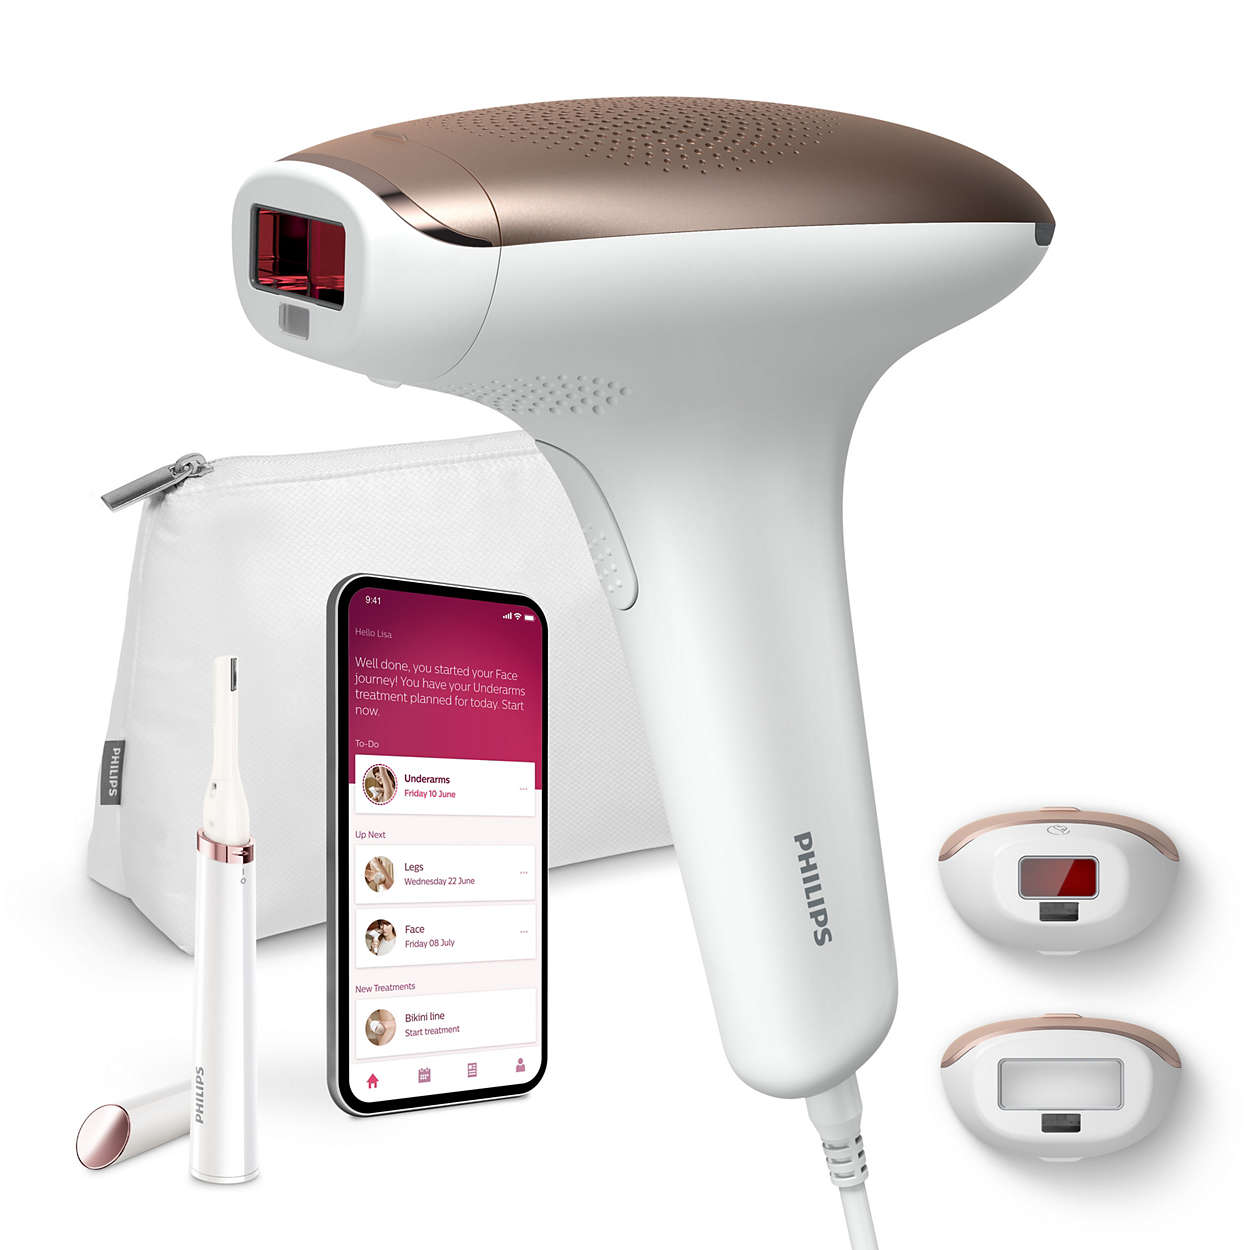 form period broadcast Philips Lumea IPL 7000 Series Advanced IPL hair removal device for  long-lasting results BRI921/00 | Philips